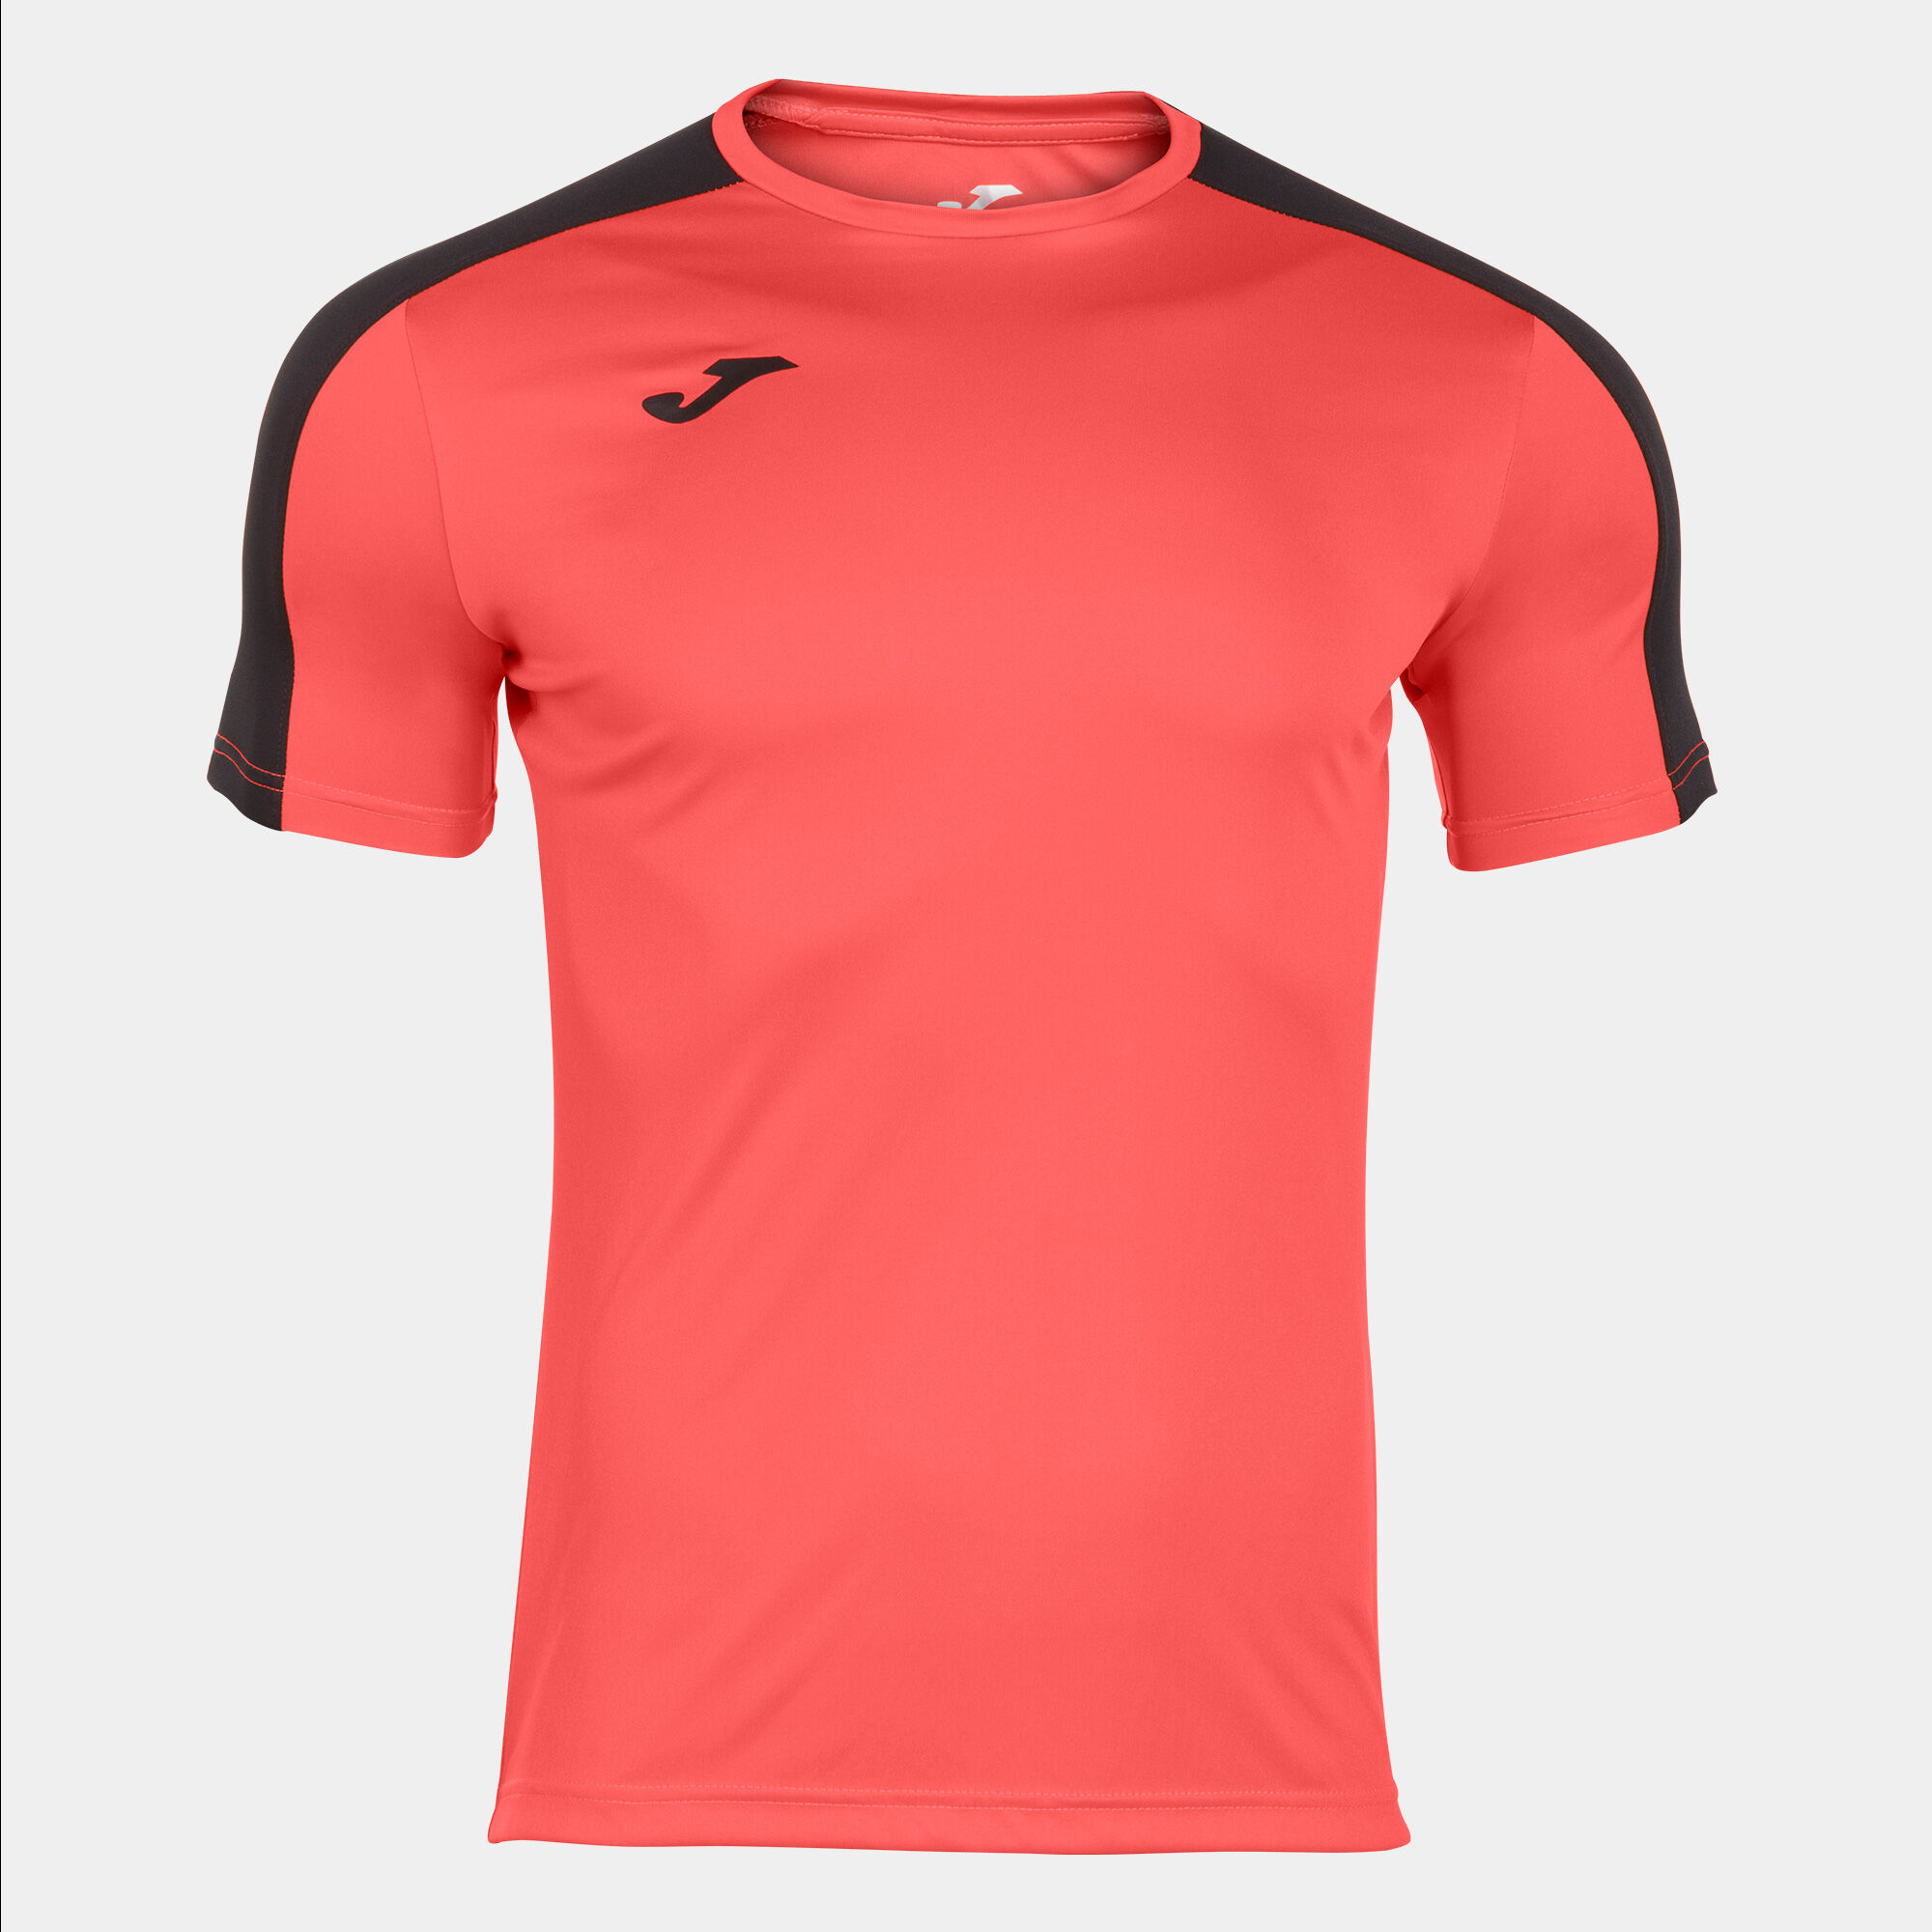 Maillot manches courtes homme Academy III corail fluo noir